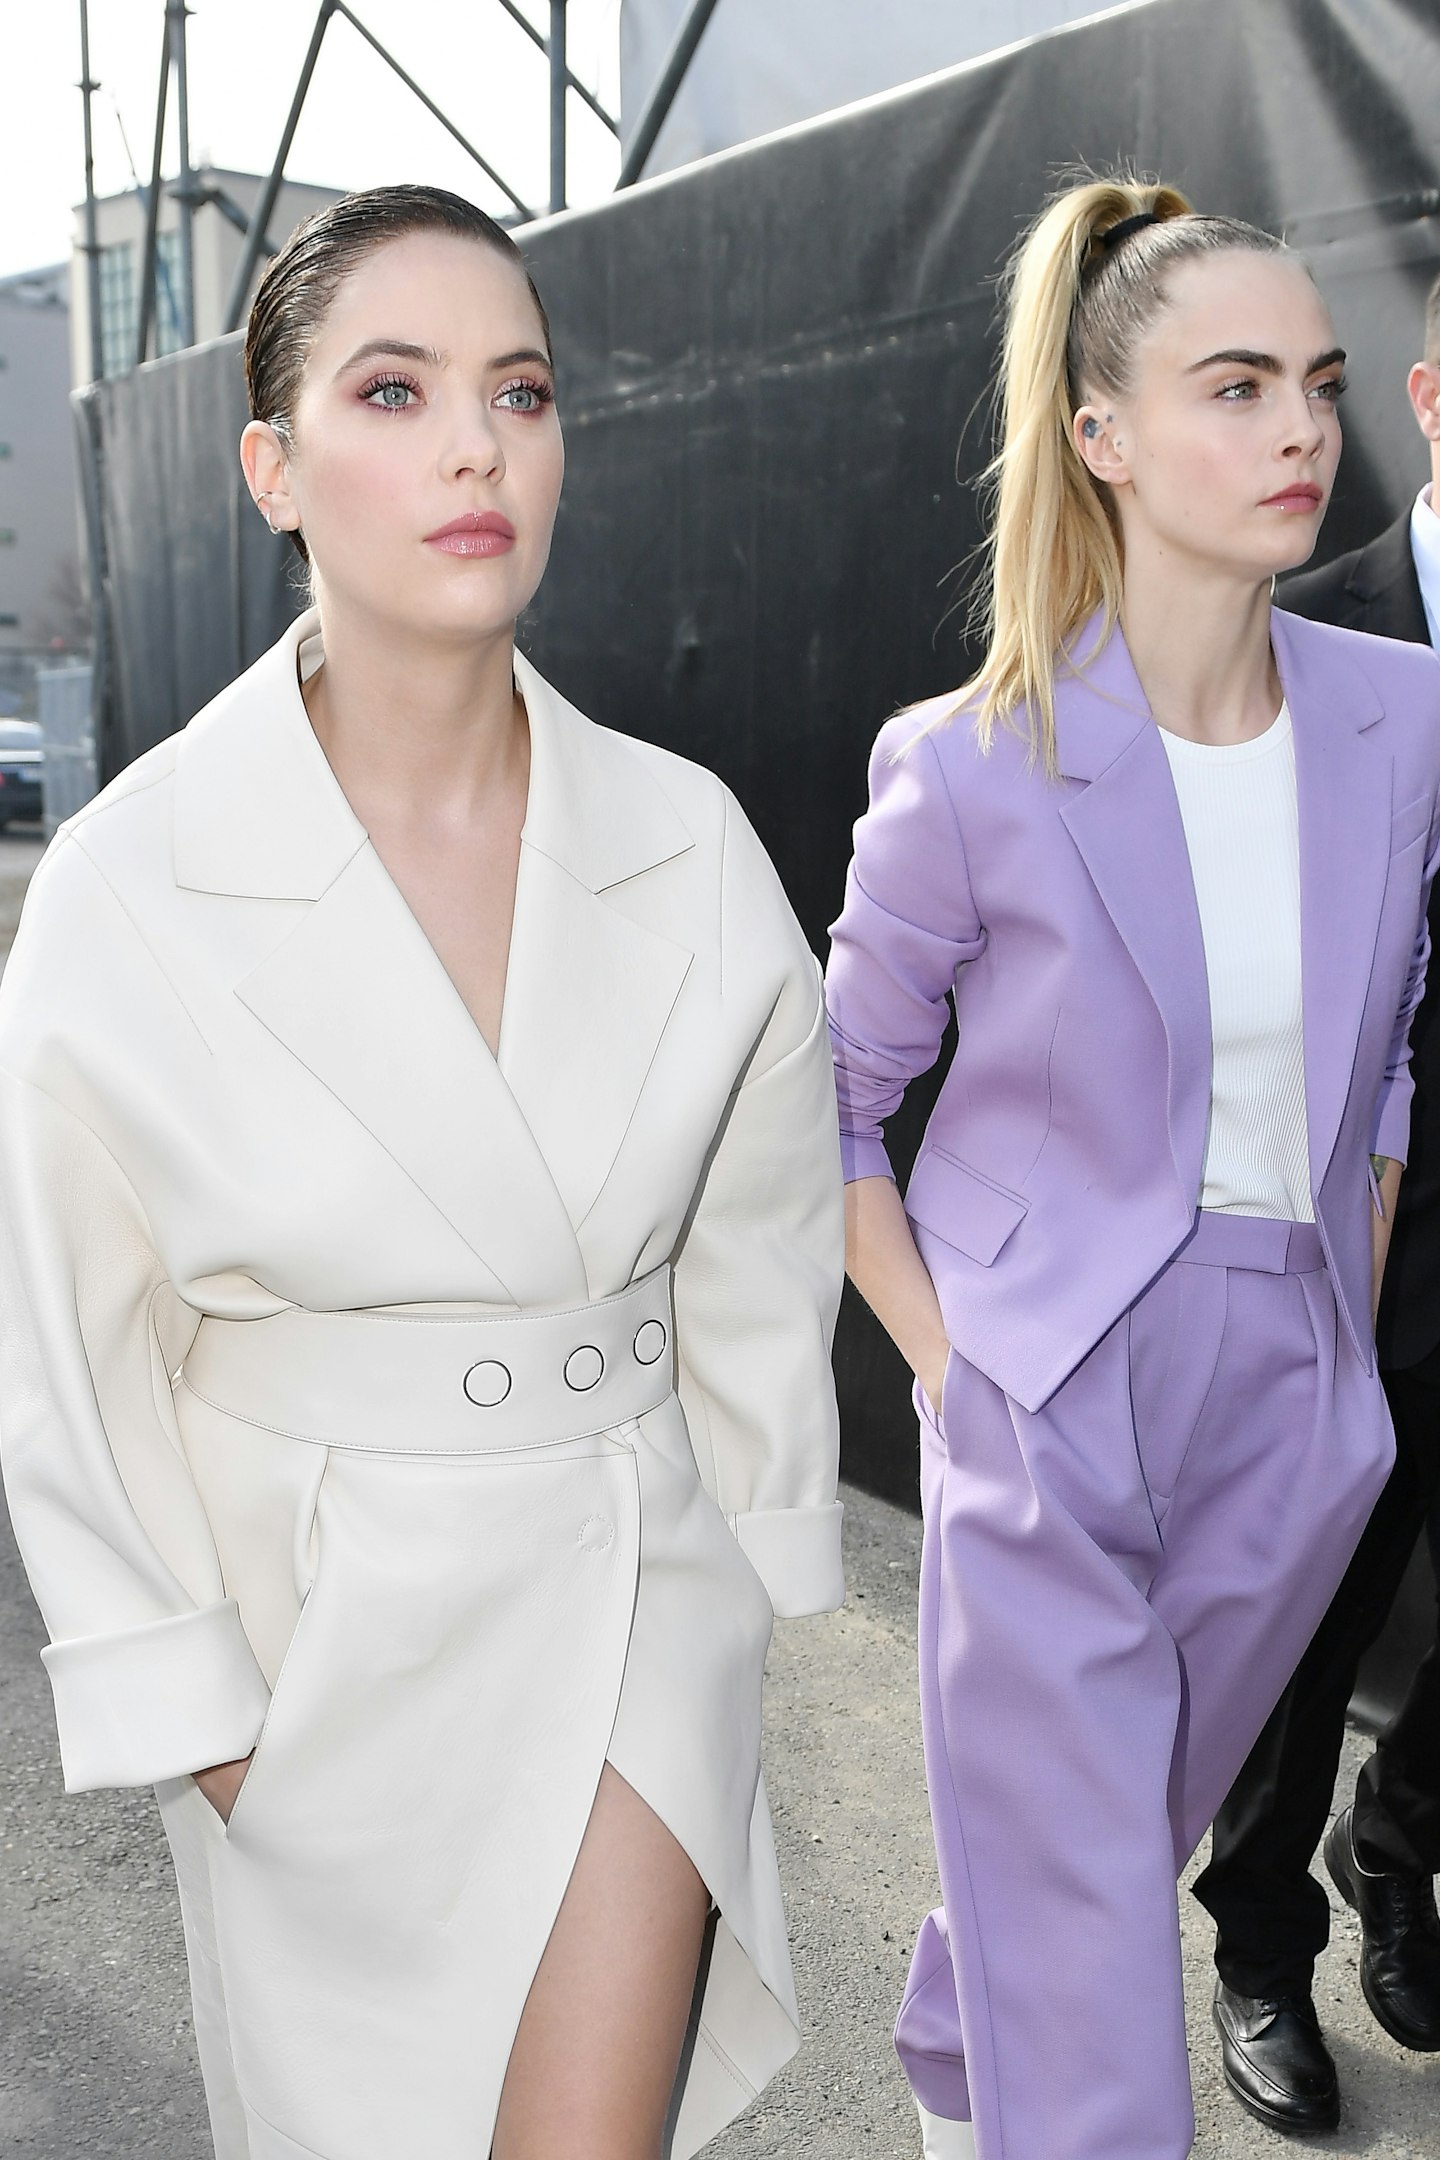 Ashley Benson and Cara Delevingne arrive at the Boss fashion show on February 23, 2020 in Milan, Italy. 